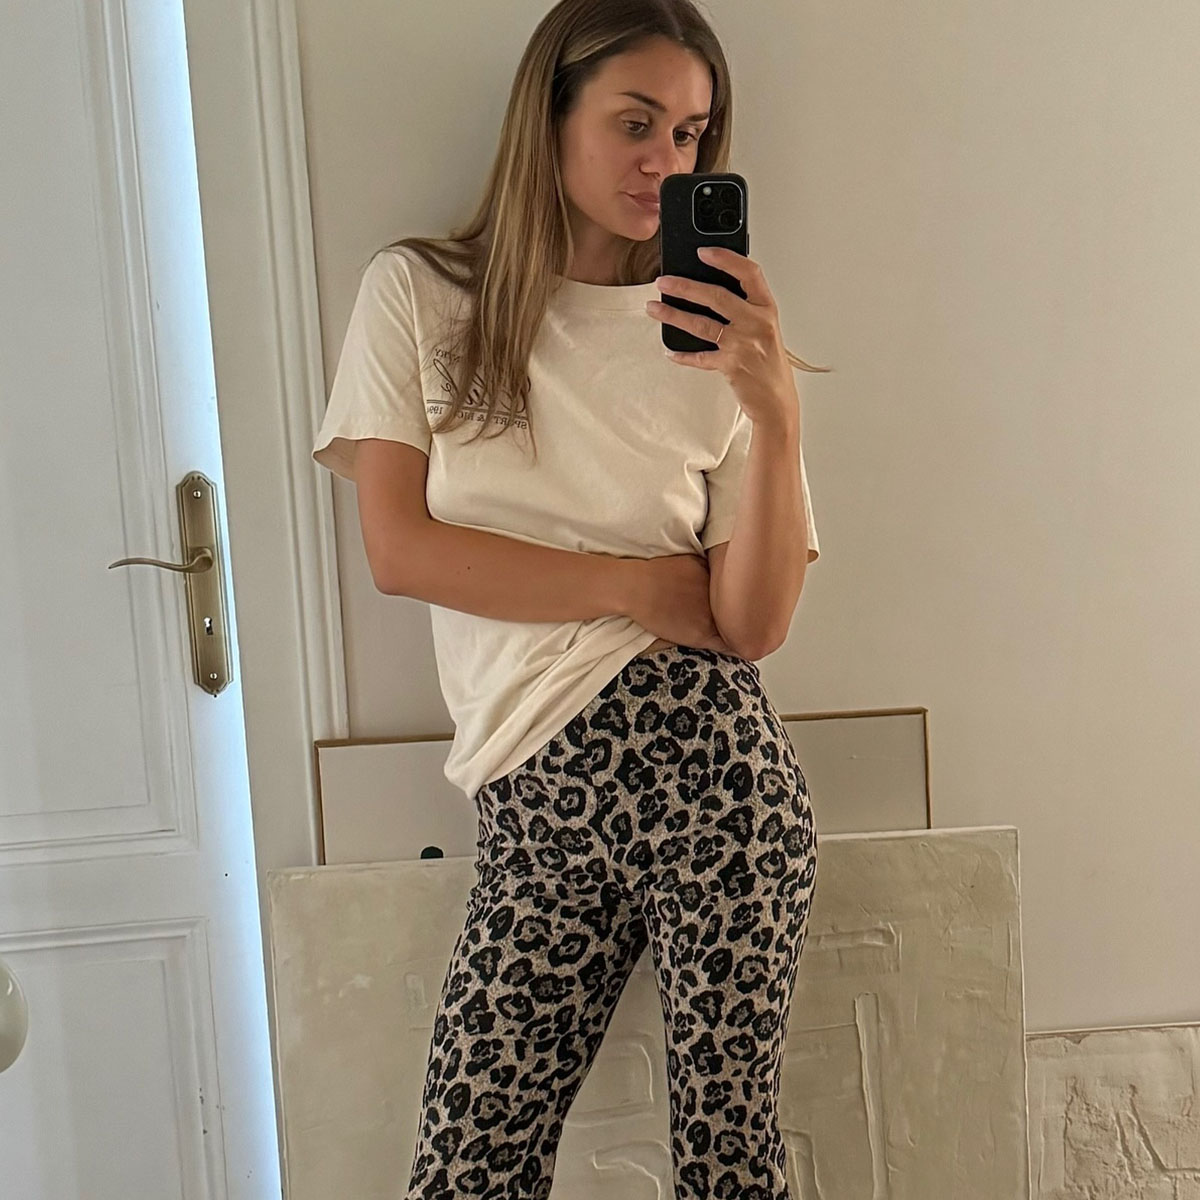 Every Fashion Person Is Wearing One of These 6 Summer Pant Trends—I Found the Coolest for Under $100